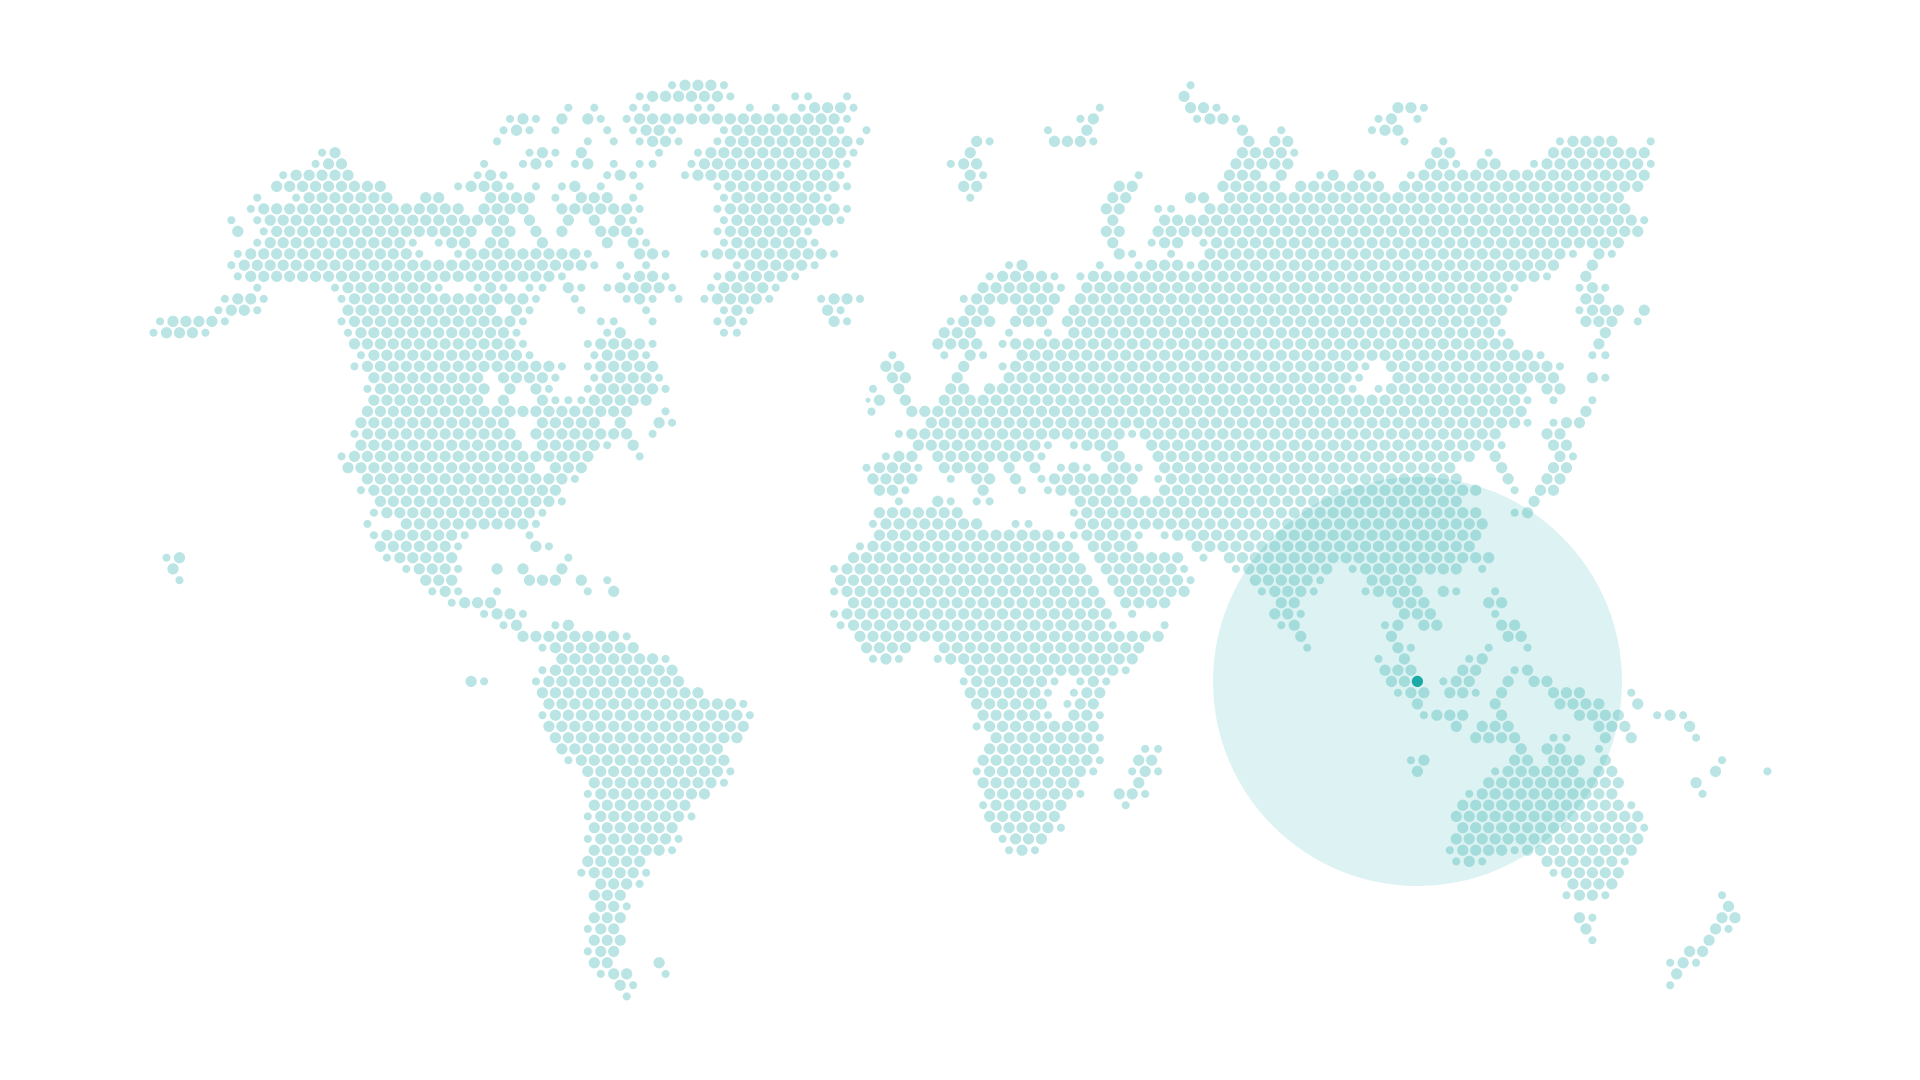 A world map with Singapore highlighted